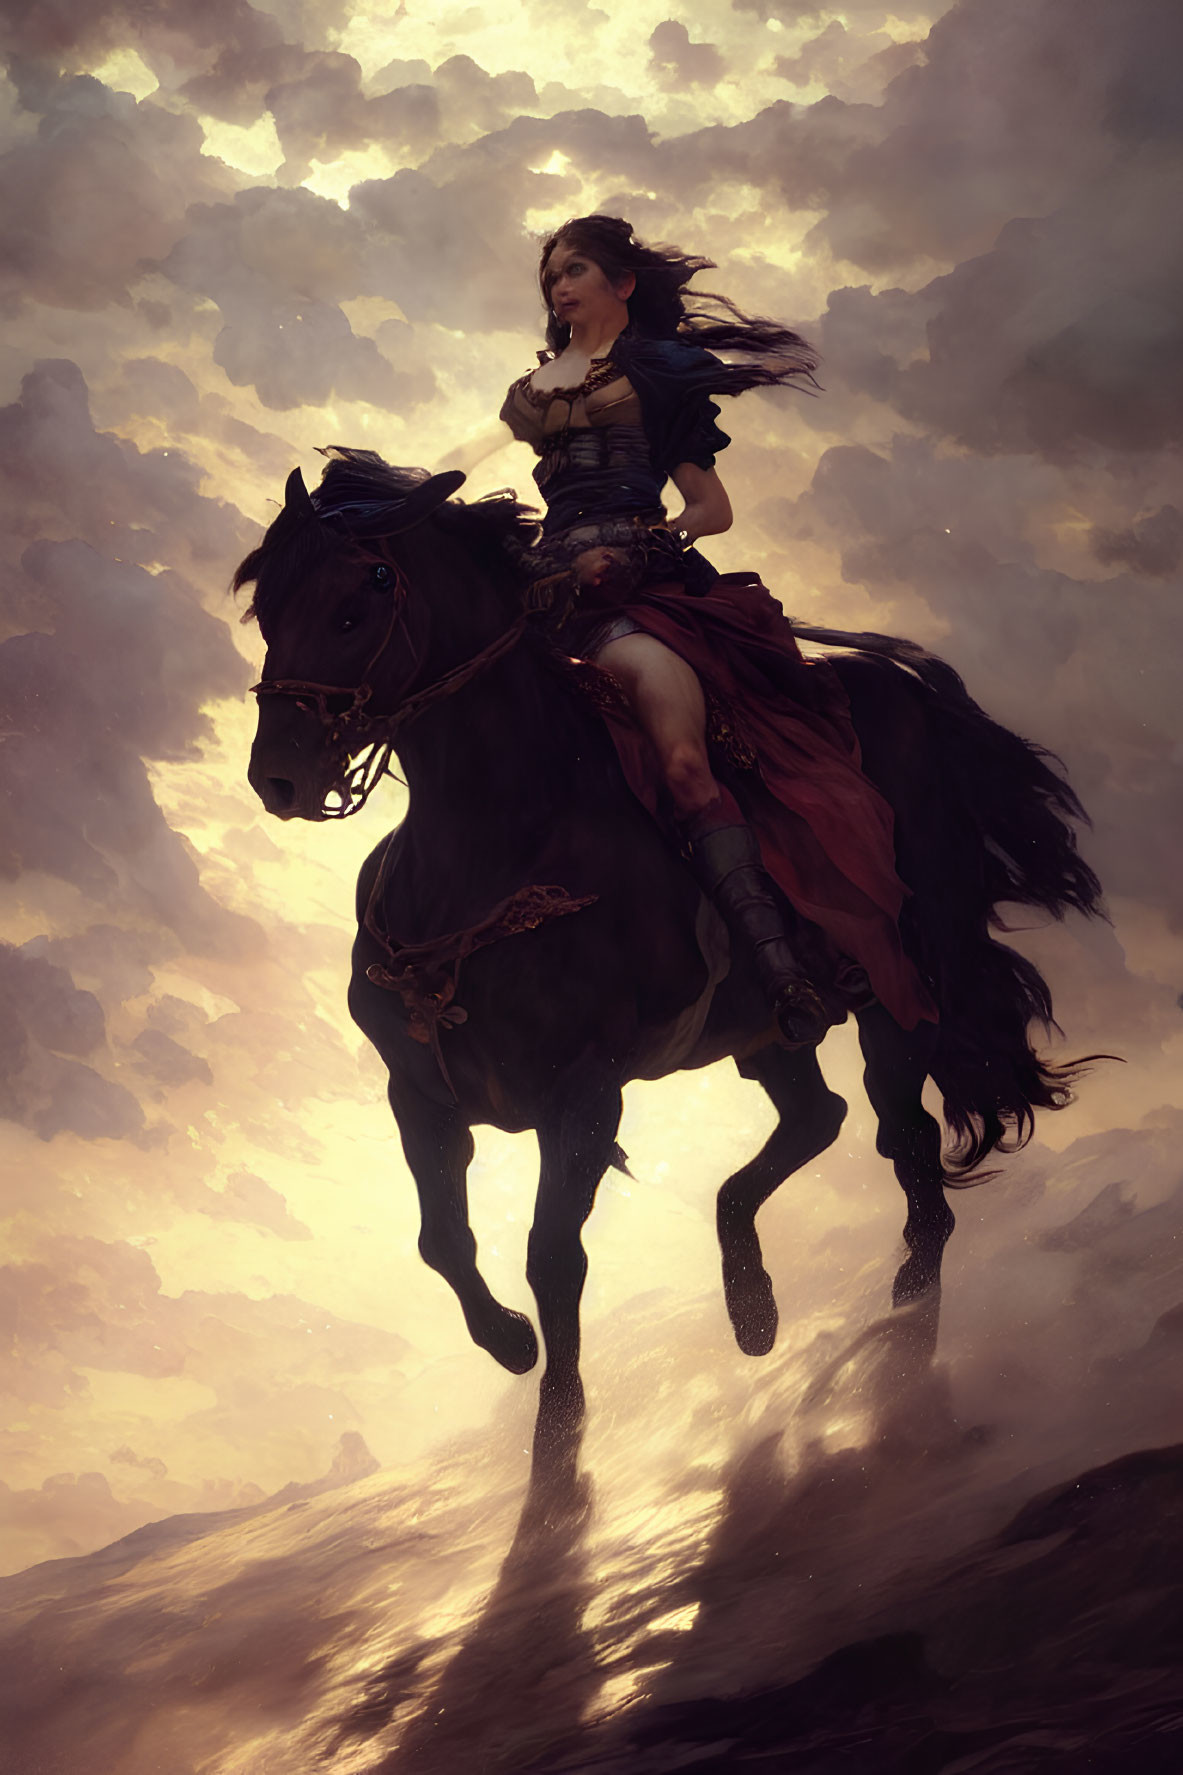 Warrior woman in armor on black horse under dramatic sky